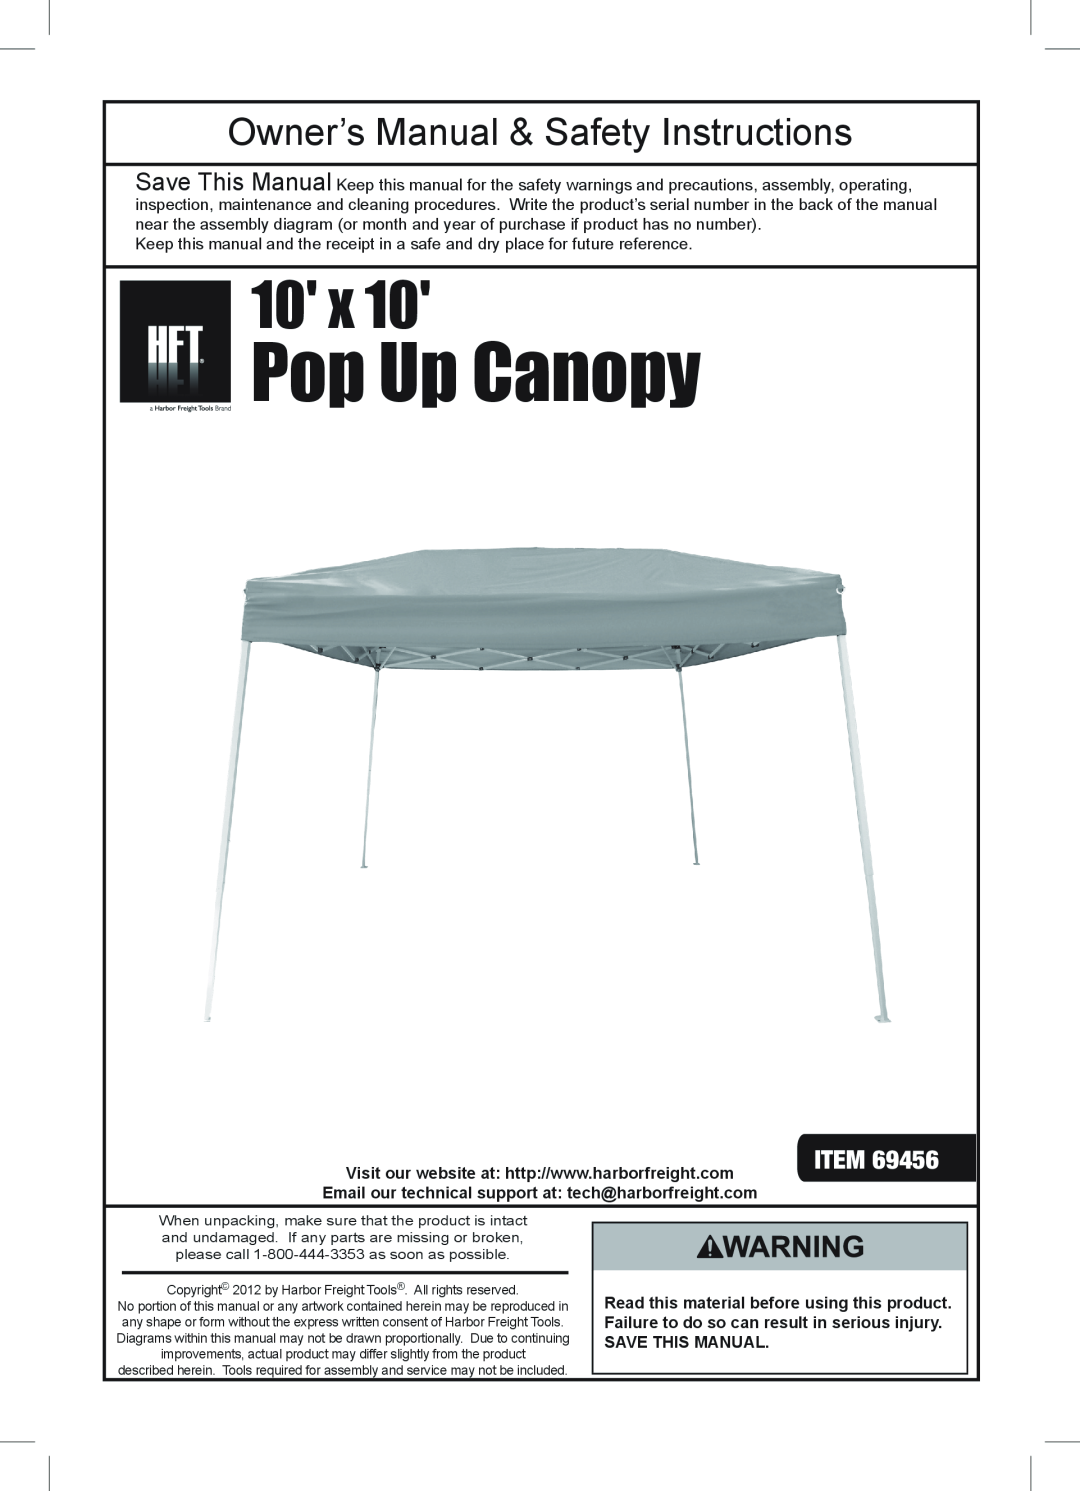 Harbor Freight Tools 69456 owner manual Pop Up Canopy 